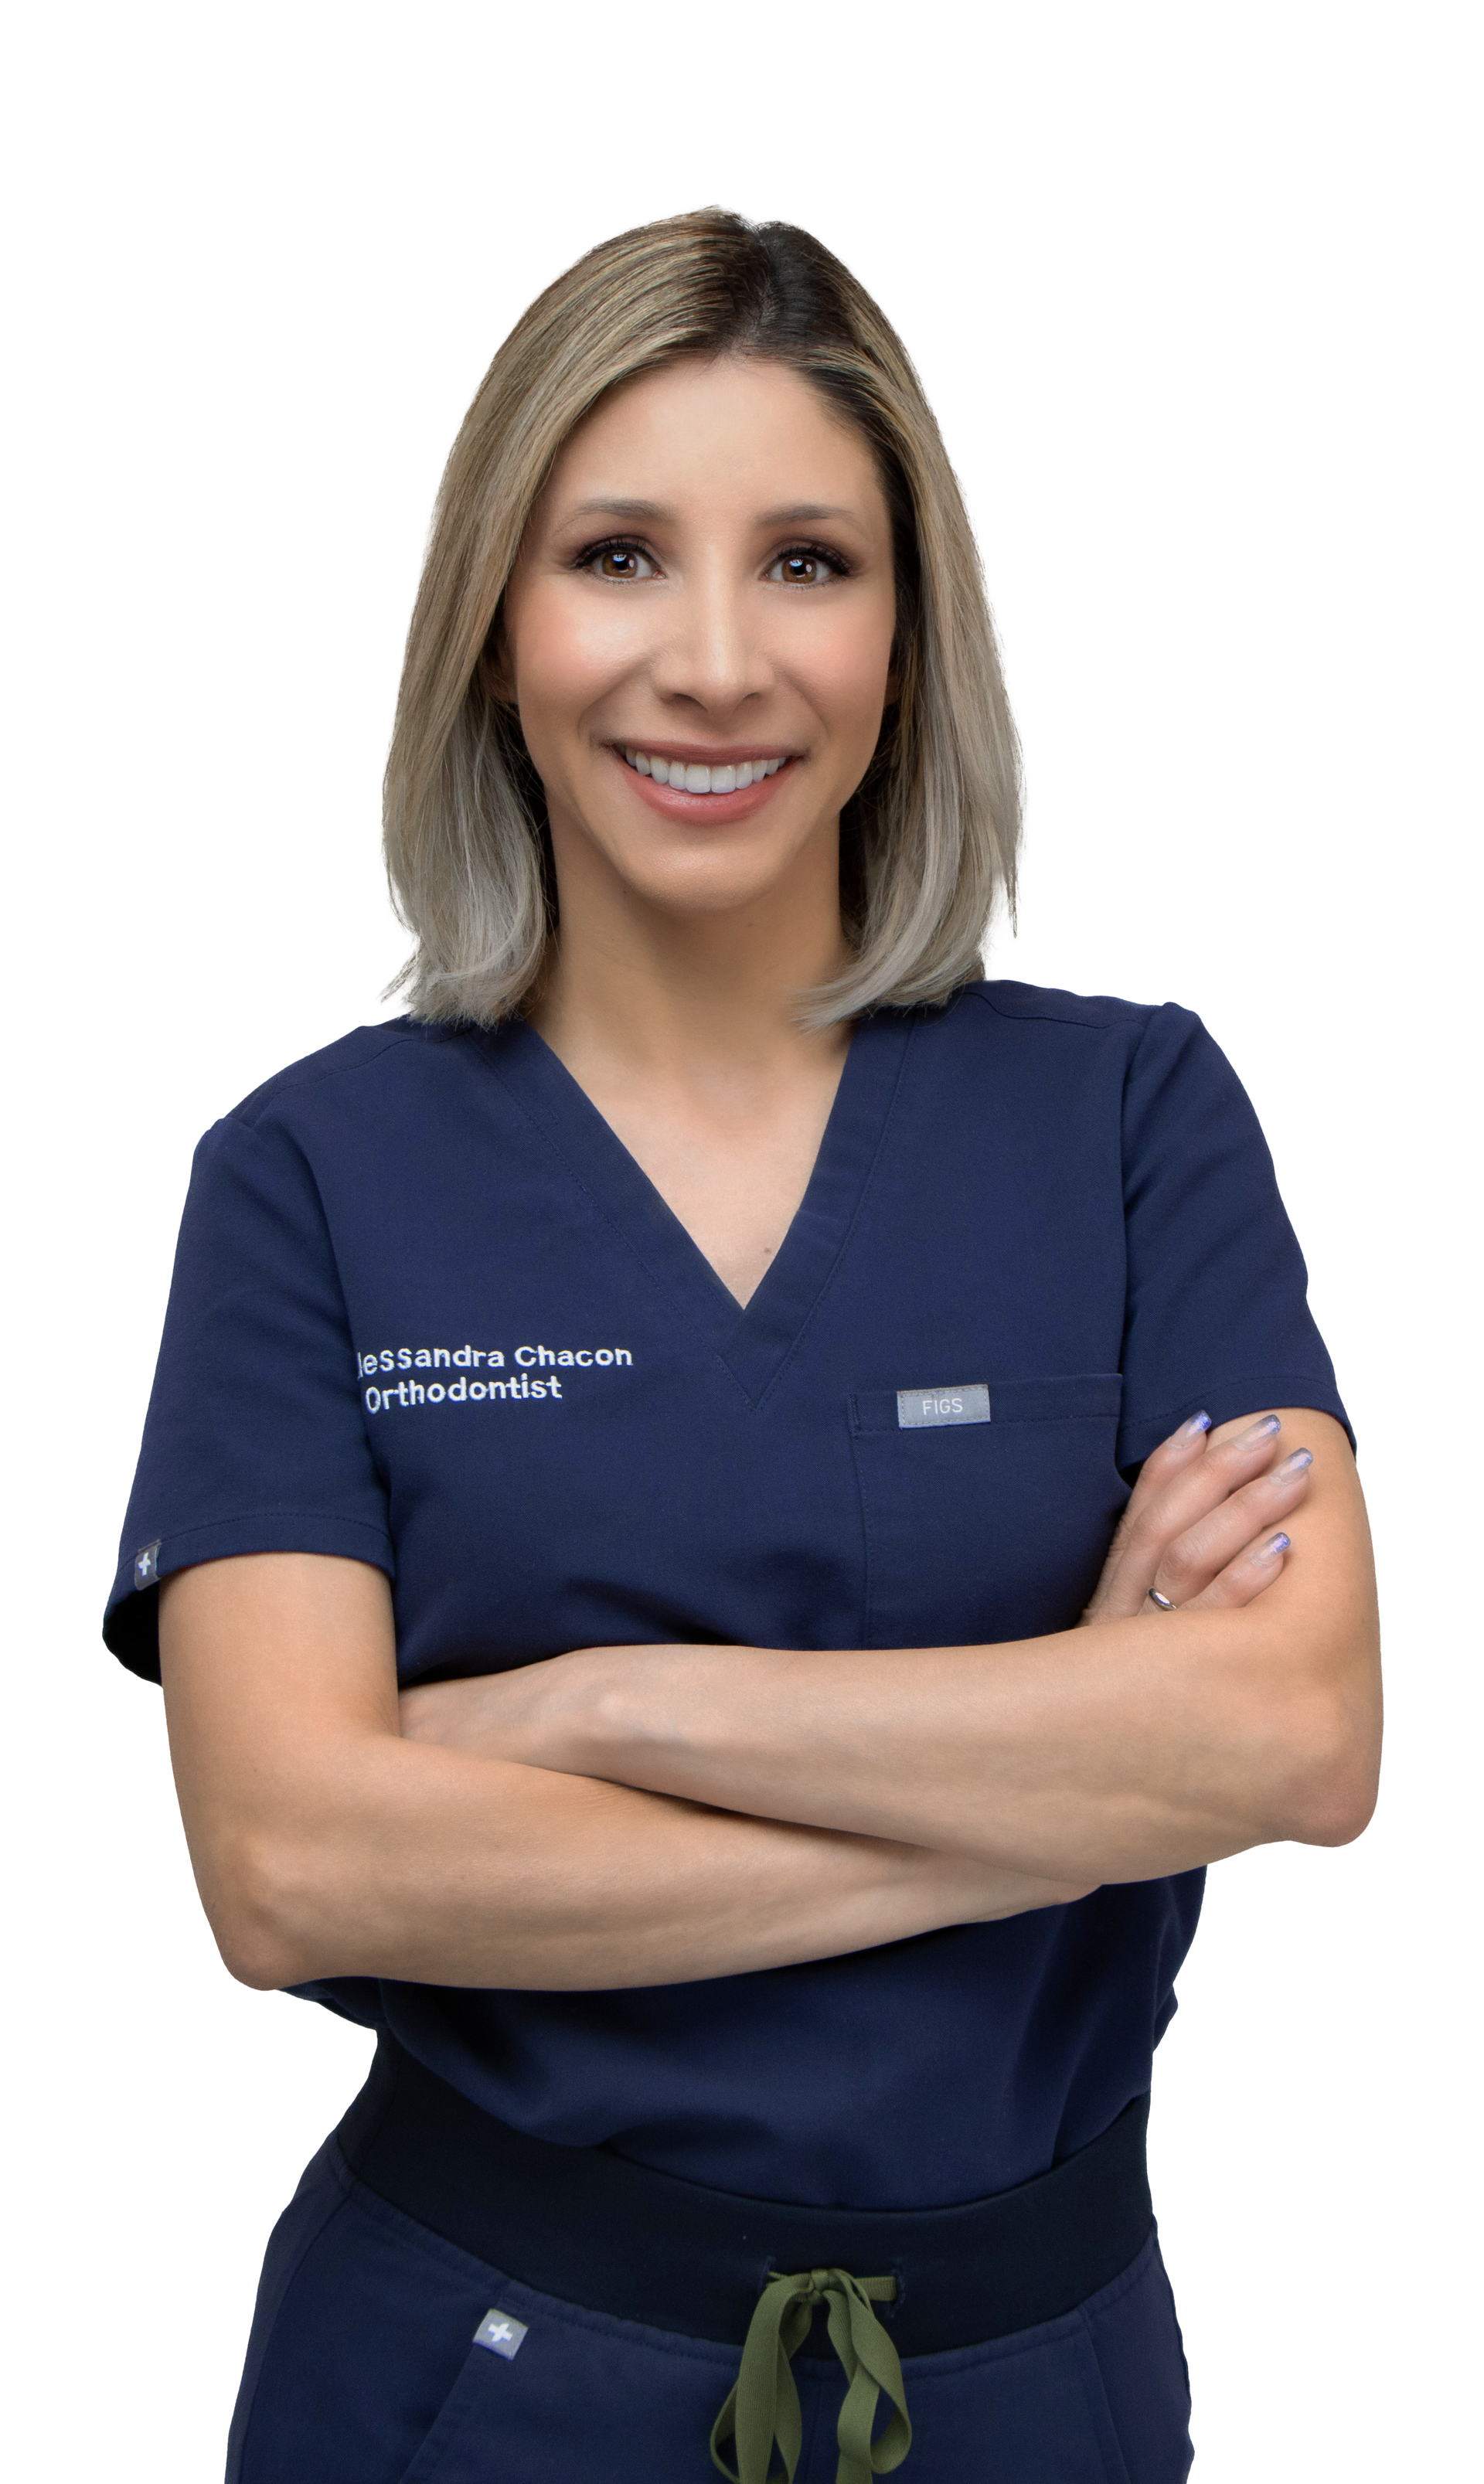 Alessandra Chacon, DDS, MS